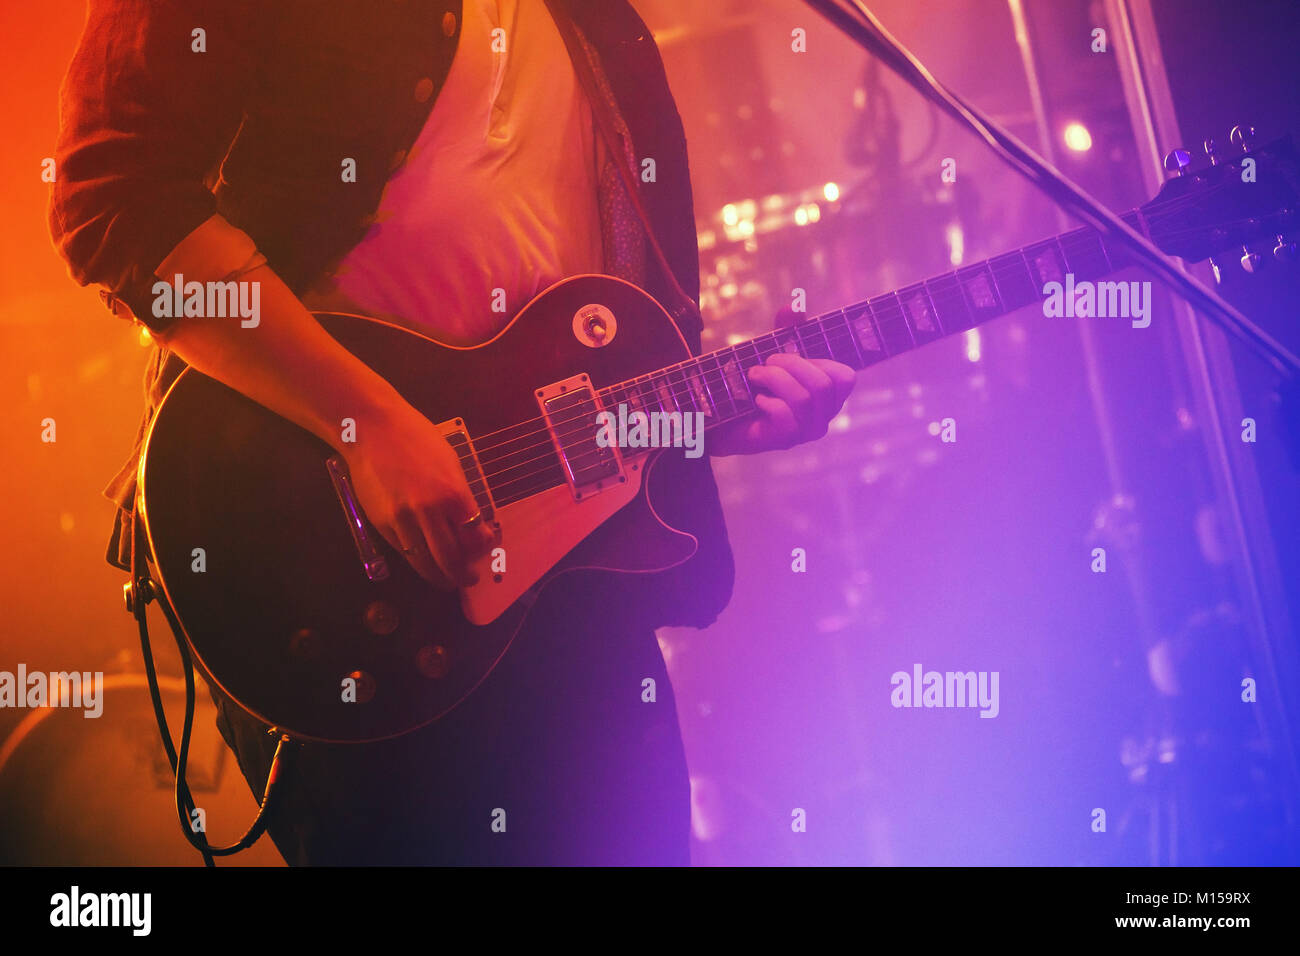 Electric guitar player plays on a stage with colorful scenic illumination, soft selective focus Stock Photo